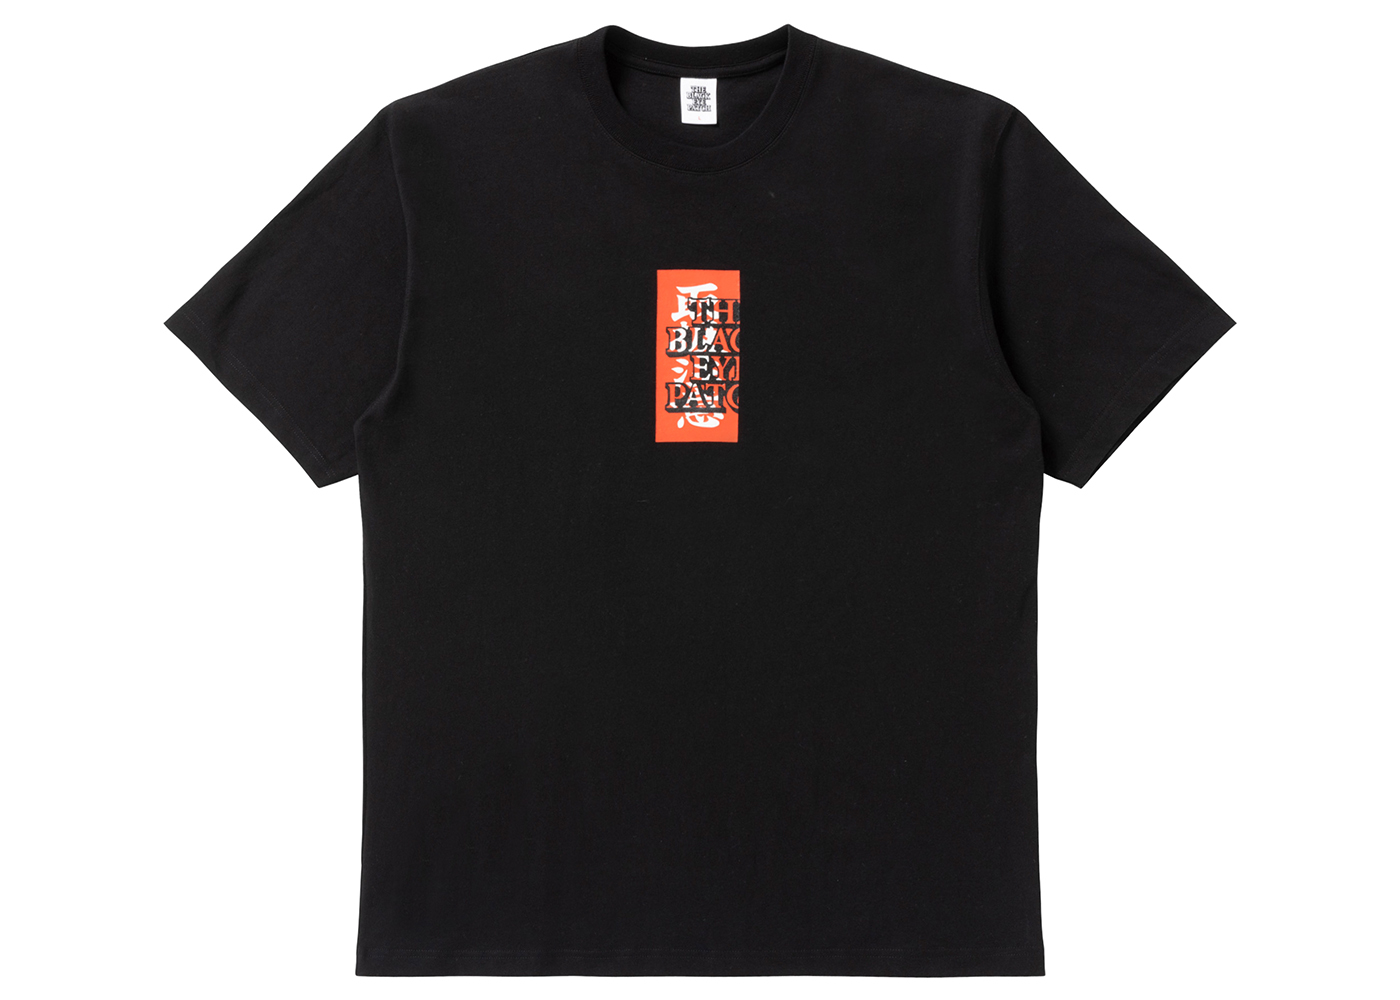 BlackEyePatch Handle with Care Label Tee Black - SS22 - US